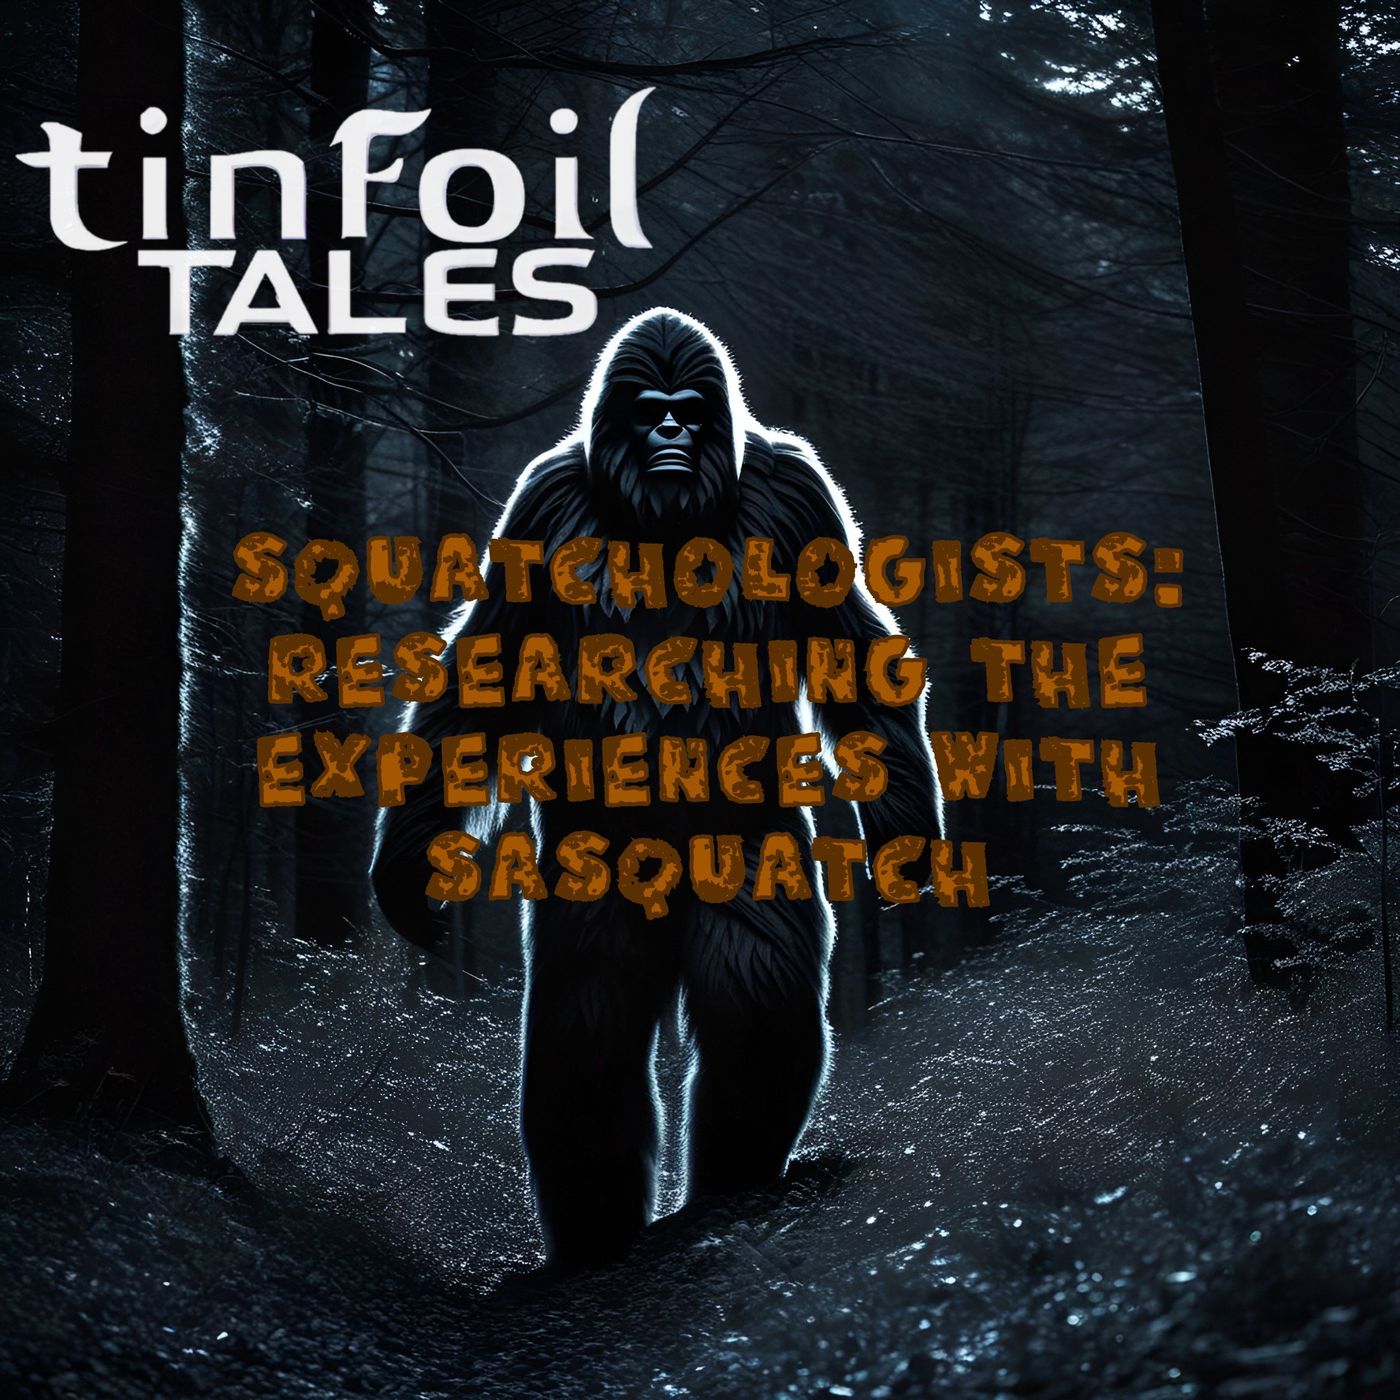 Ep. 72: Squatchologists: Researching the Experiences with Sasquatch